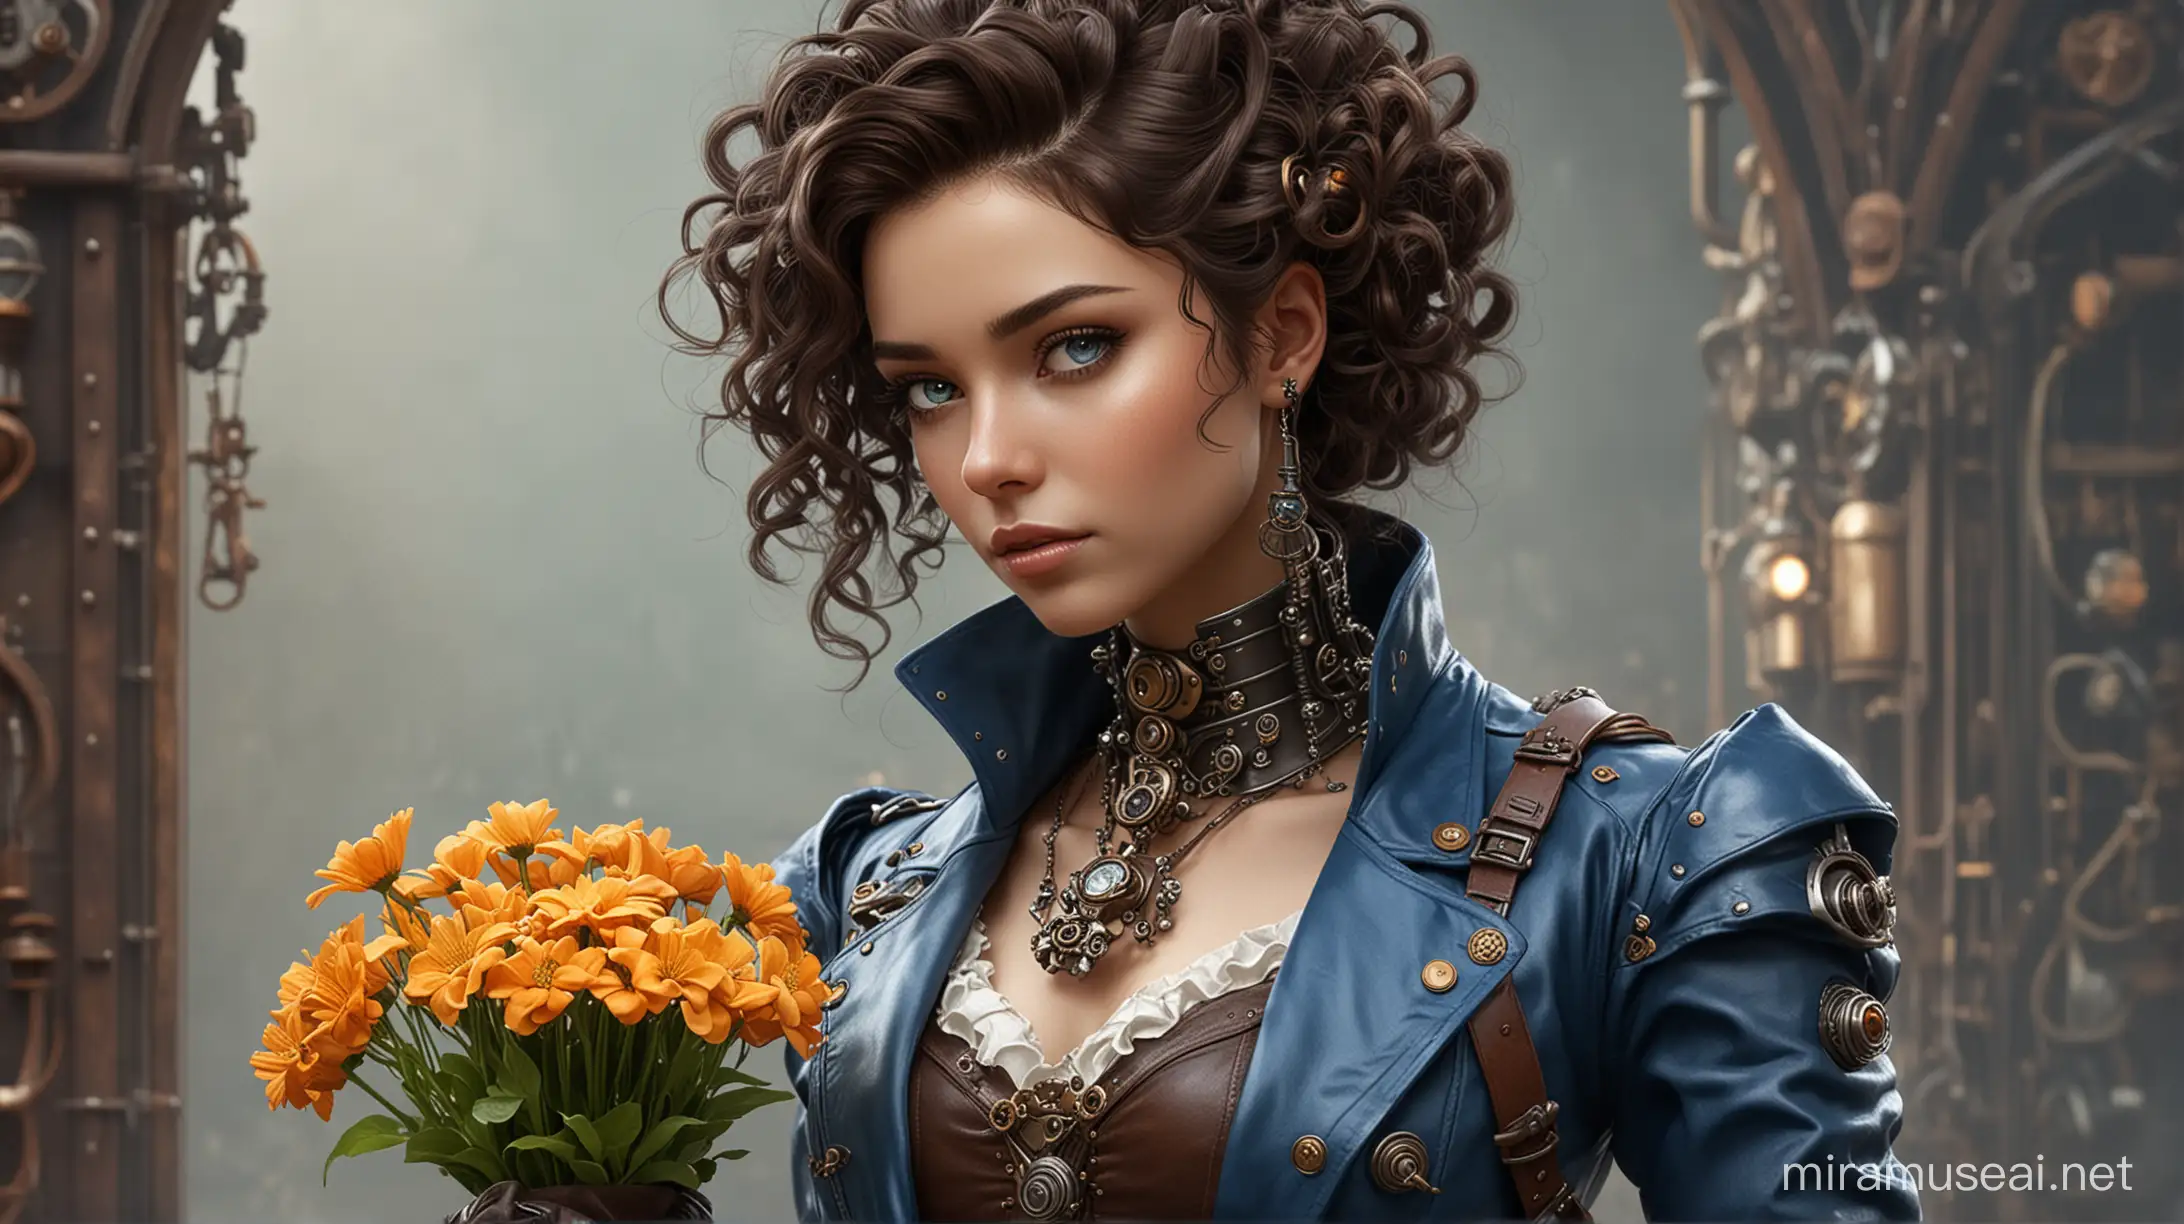 Steampunk Robot Presents Flowers to a CurlyHaired Woman in Blue Leather Jacket